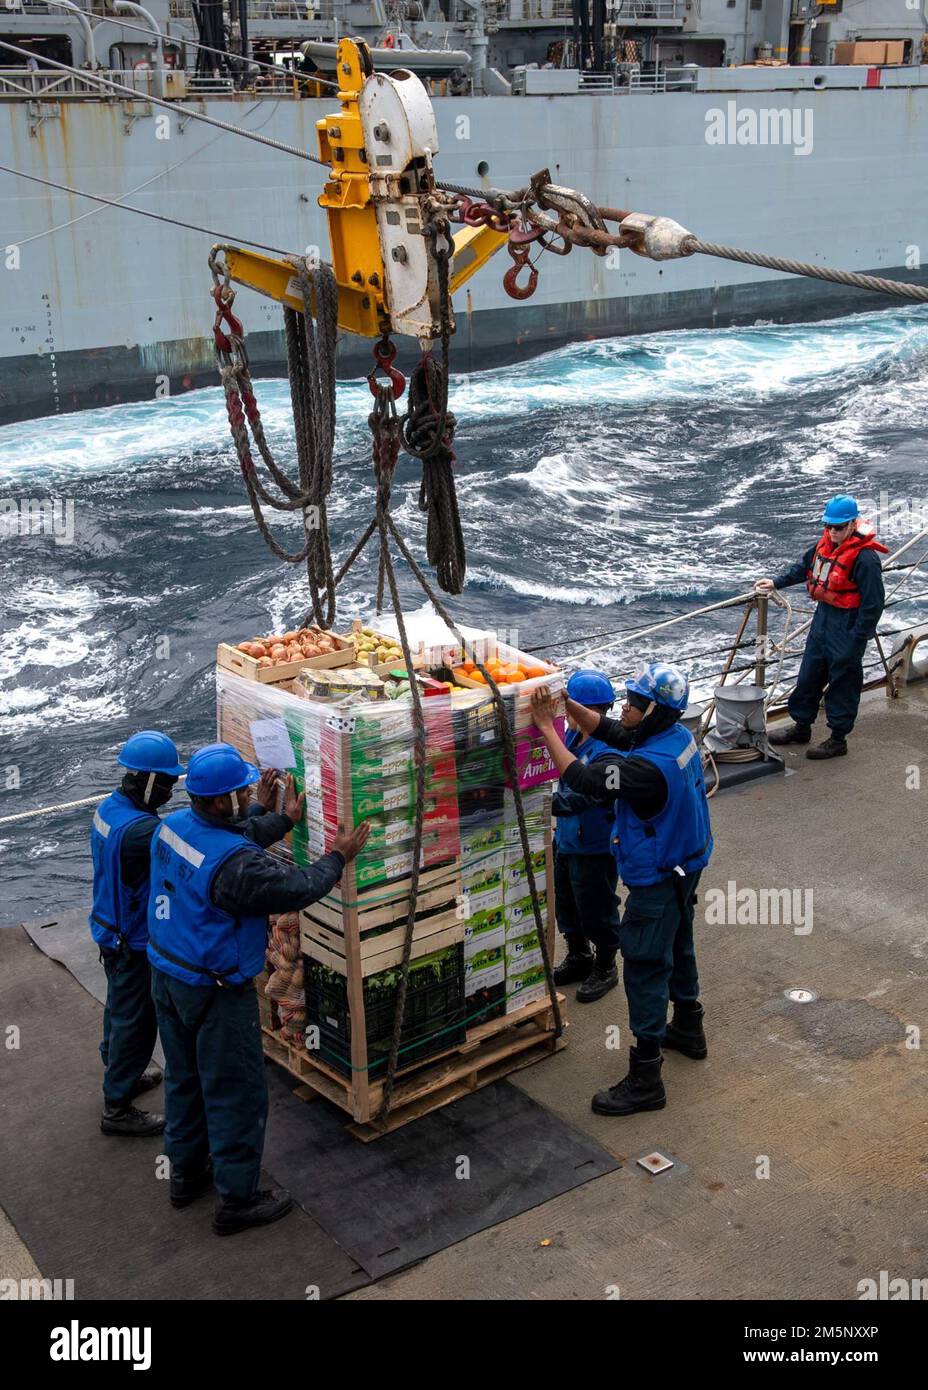 220226-N-HG846-1070 ADRIATIC SEA (Feb. 26, 2022) Sailors aboard Arleigh Burke-class guided-missile destroyer USS Mitscher (DDG 57) receive stores during a replenishment-at-sea with the Supply-class fast combat support ship USNS Supply (T-AOE-6), Feb. 26, 2022. Mitscher is deployed with the Harry S. Truman Carrier Strike Group on a scheduled deployment in the U.S. Sixth Fleet area of operations in support of U.S., allied and partner interests in Europe and Africa. Stock Photo